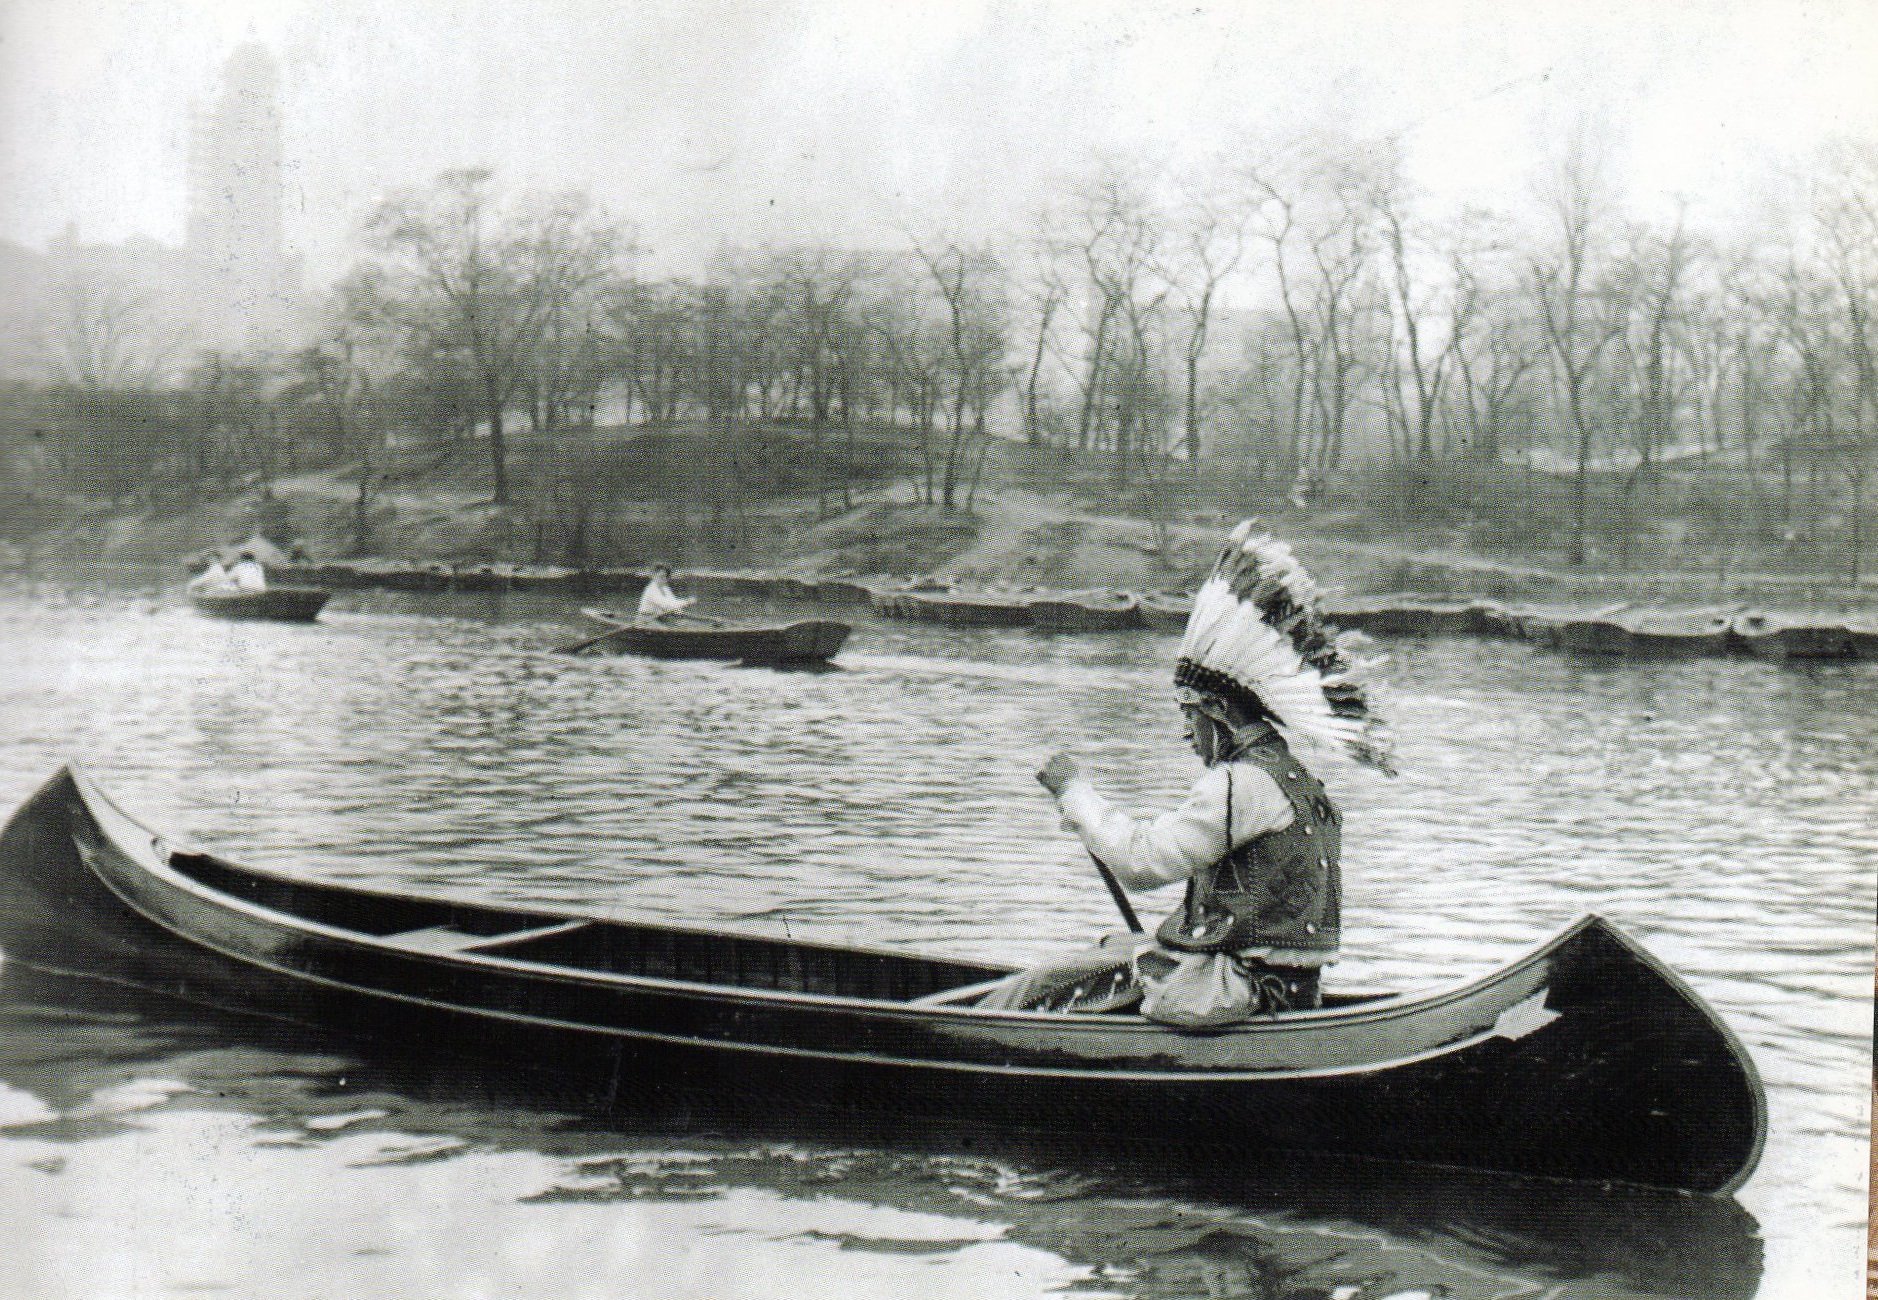 An Iroquois Indian canoes in Central Park | Ephemeral New York